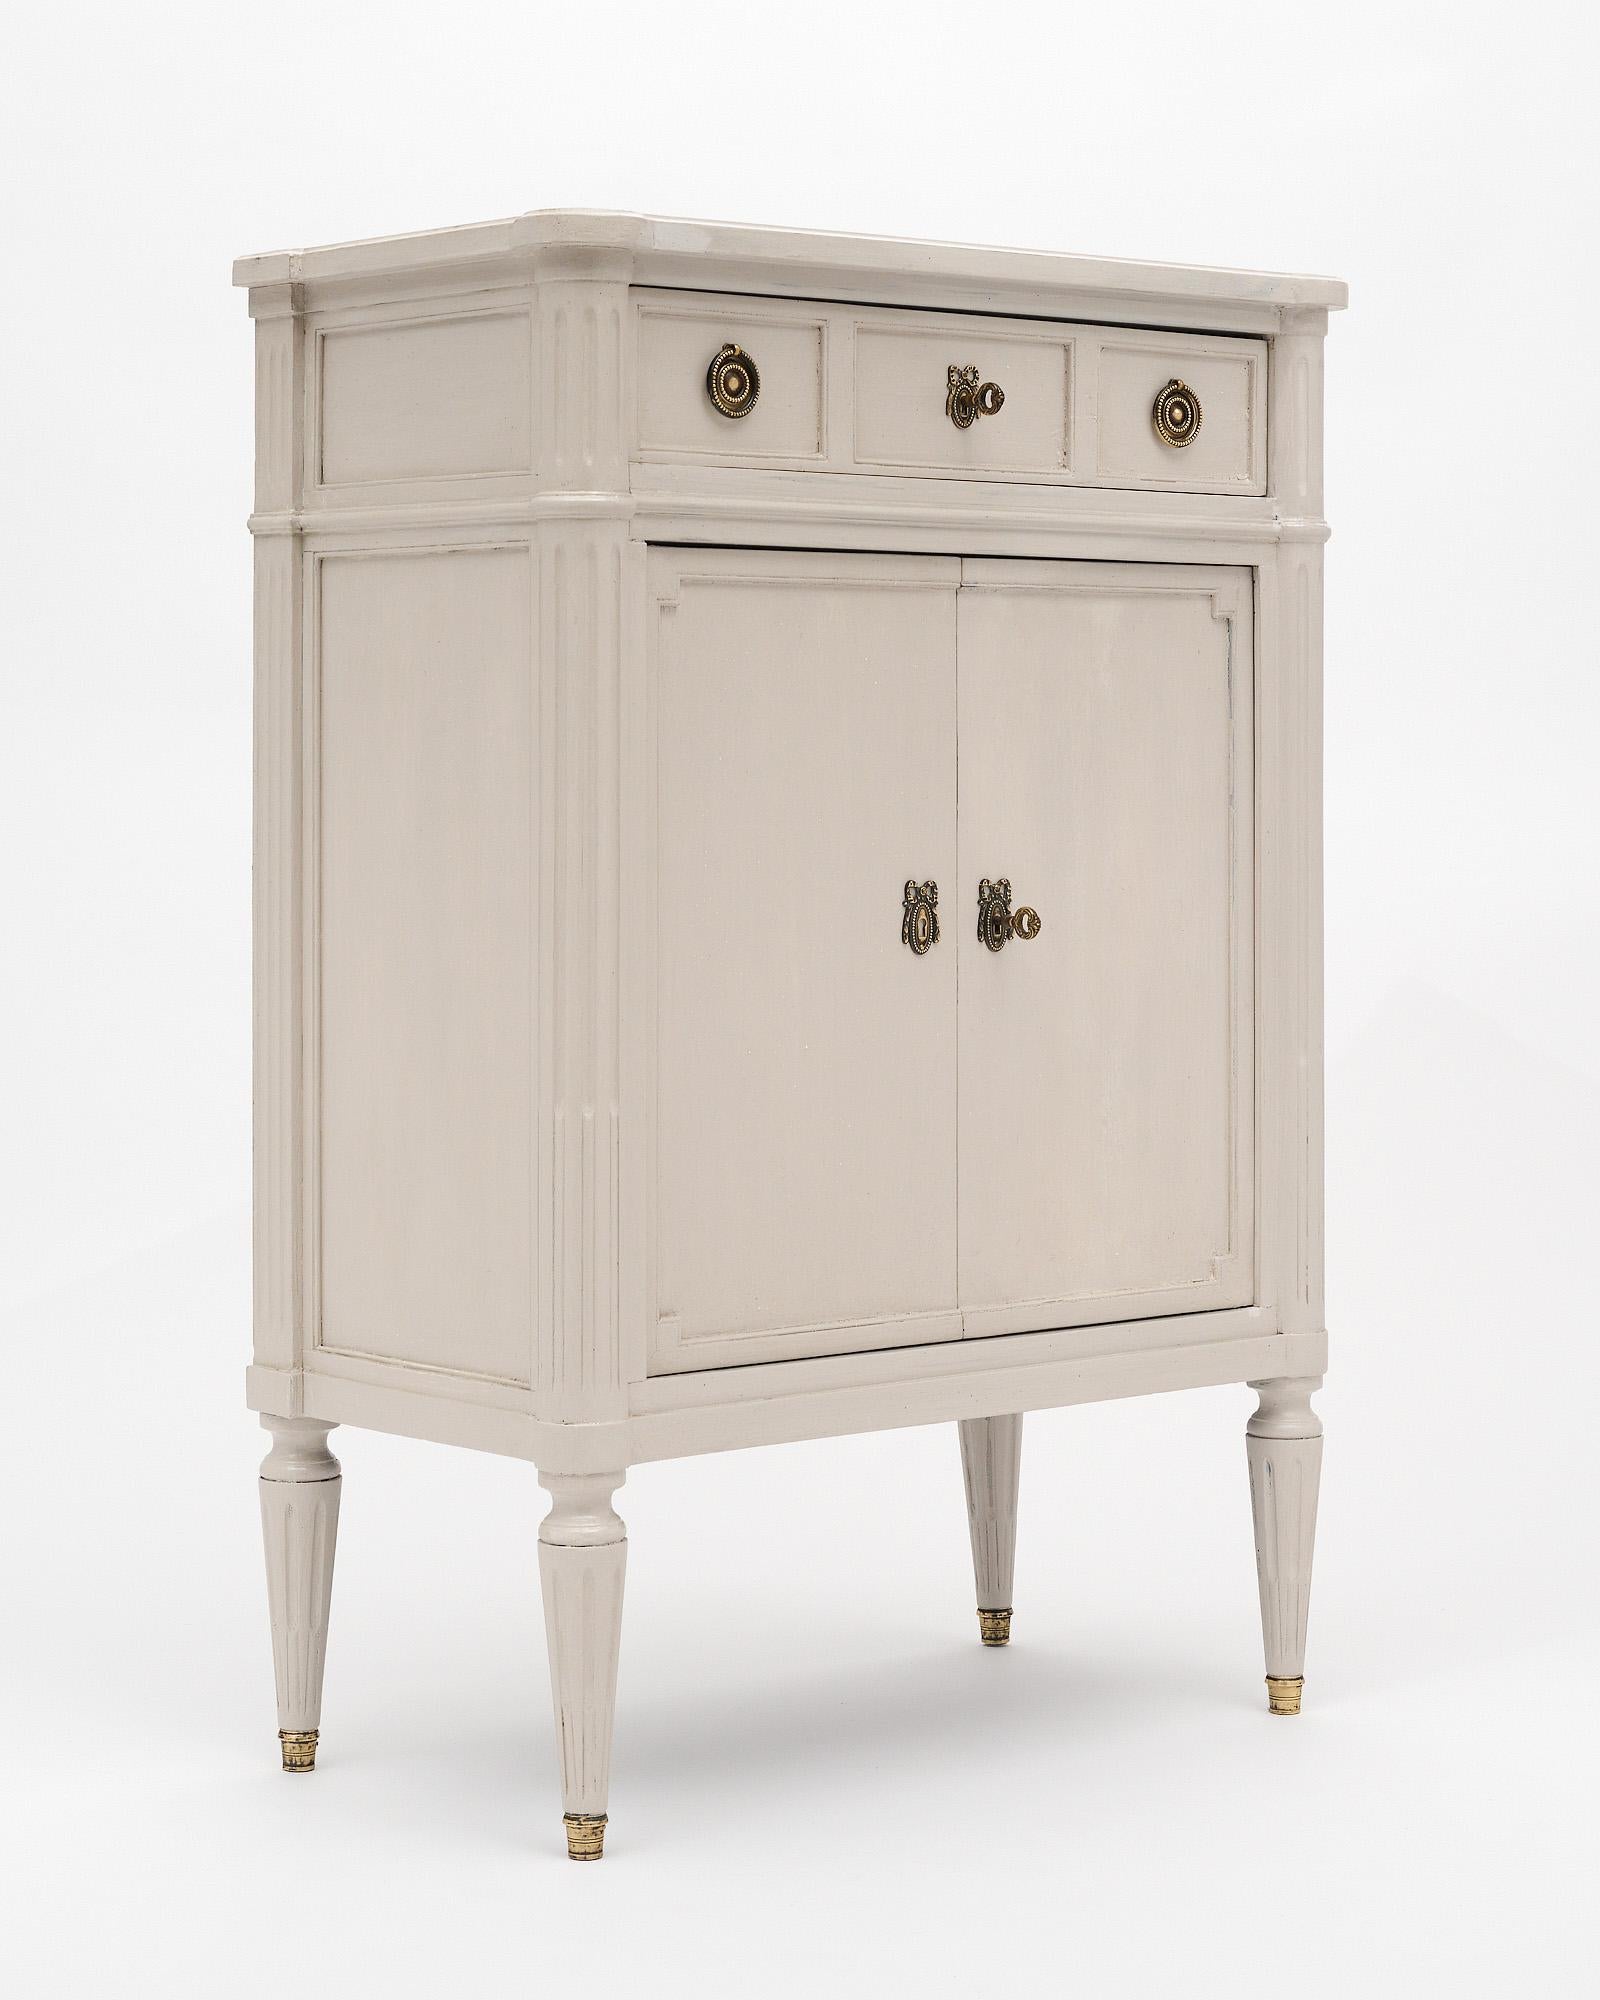 Cabinet or petite buffet from France in the Louis XVI style. This piece has a painted finish in the French “Trianon” gray color, Marie Antoinette’s favorite color to decorate the “petit TRIANON” in Versailles. The cabinet features one dovetailed